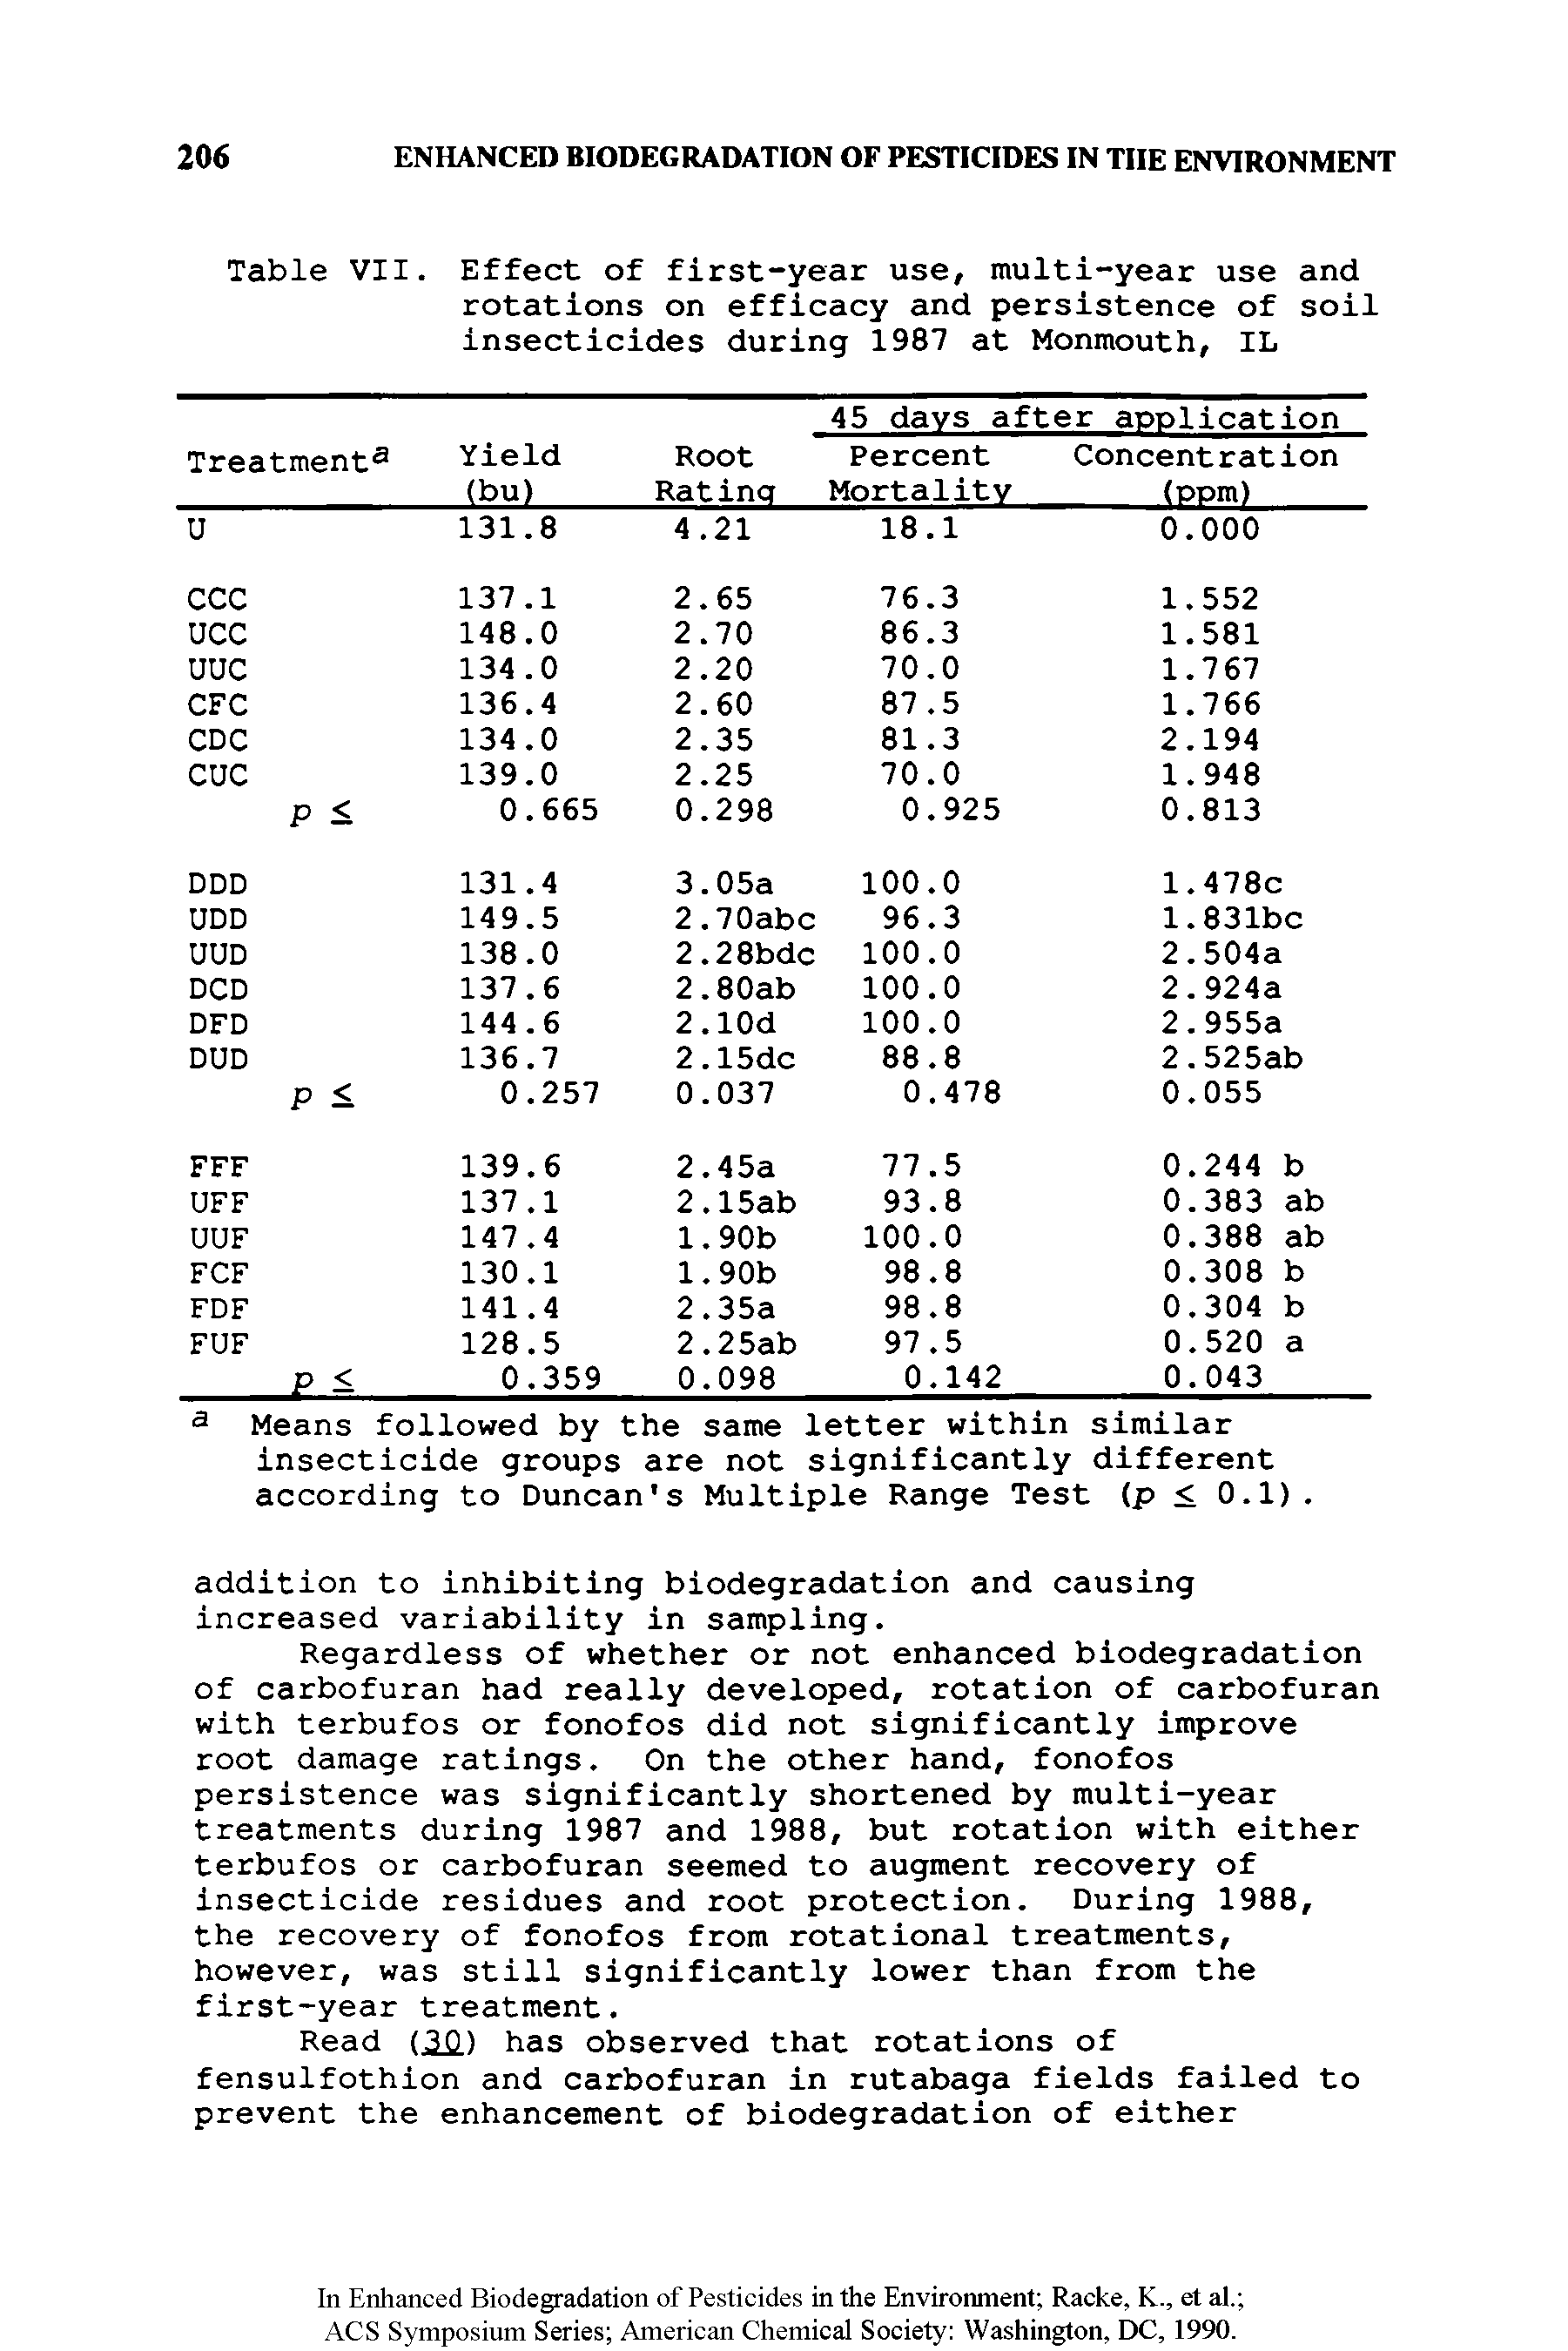 Table VII. Effect of first-year use, multi-year use and rotations on efficacy and persistence of soil insecticides during 1987 at Monmouth, IL...